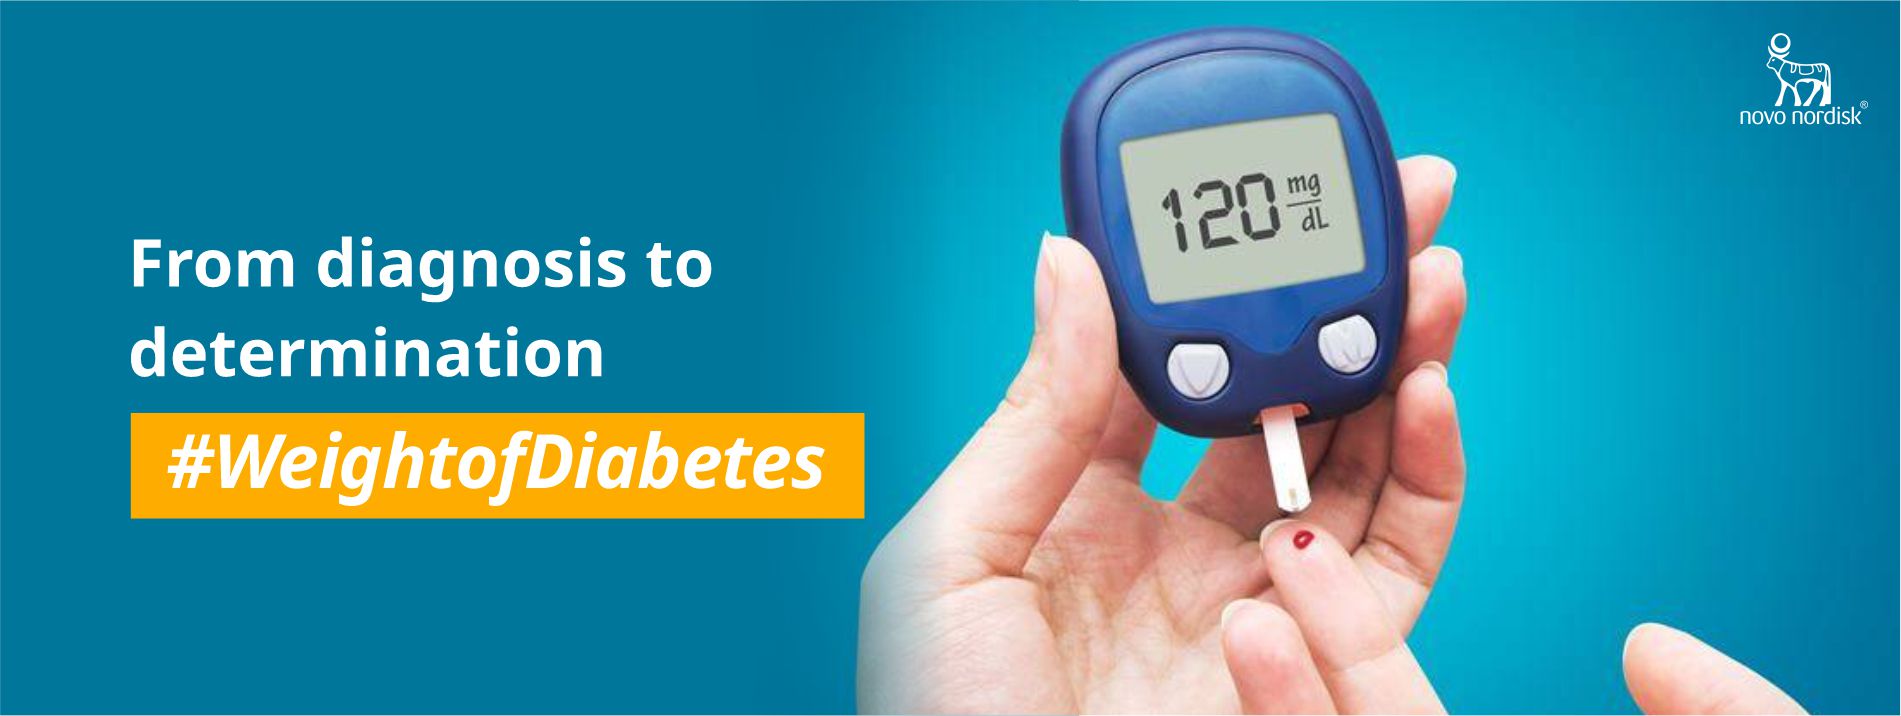 Blood glucose test results indicating diabetes diagnosis